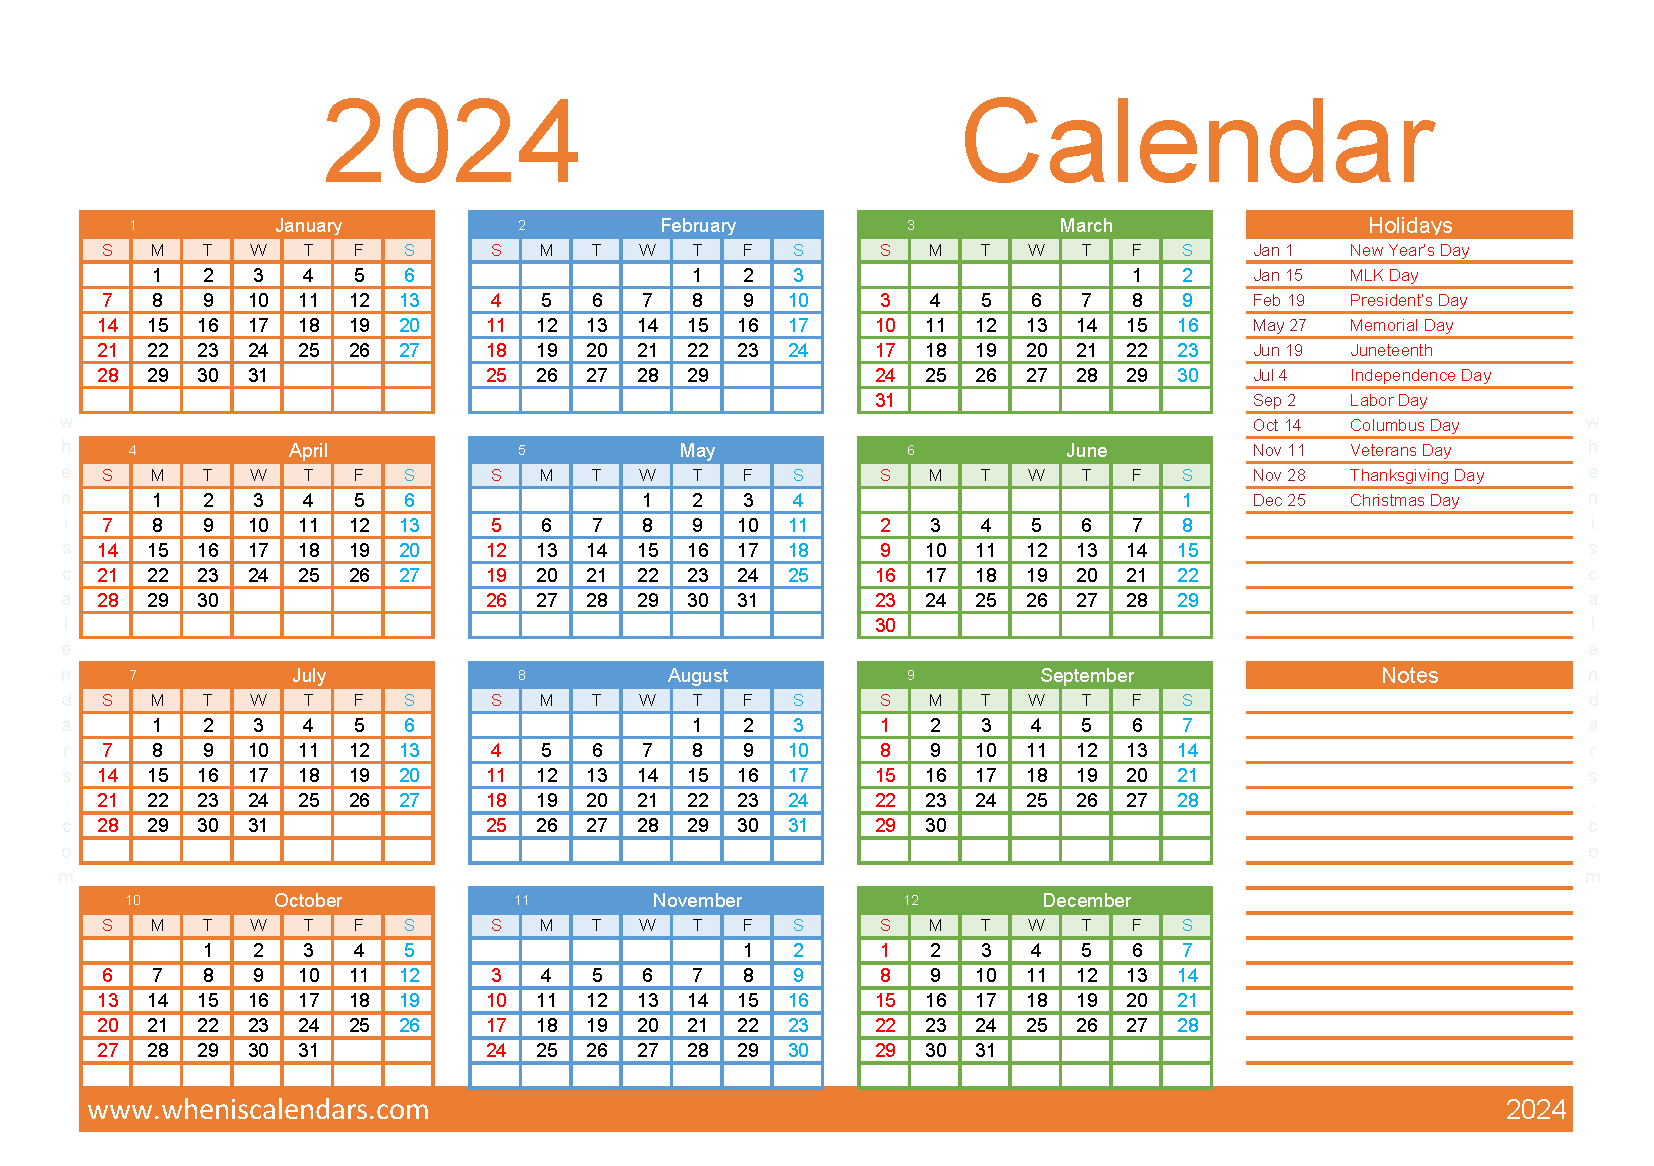 Download free printable 2024 Calendar with Holidays A5 in horizontal landscape